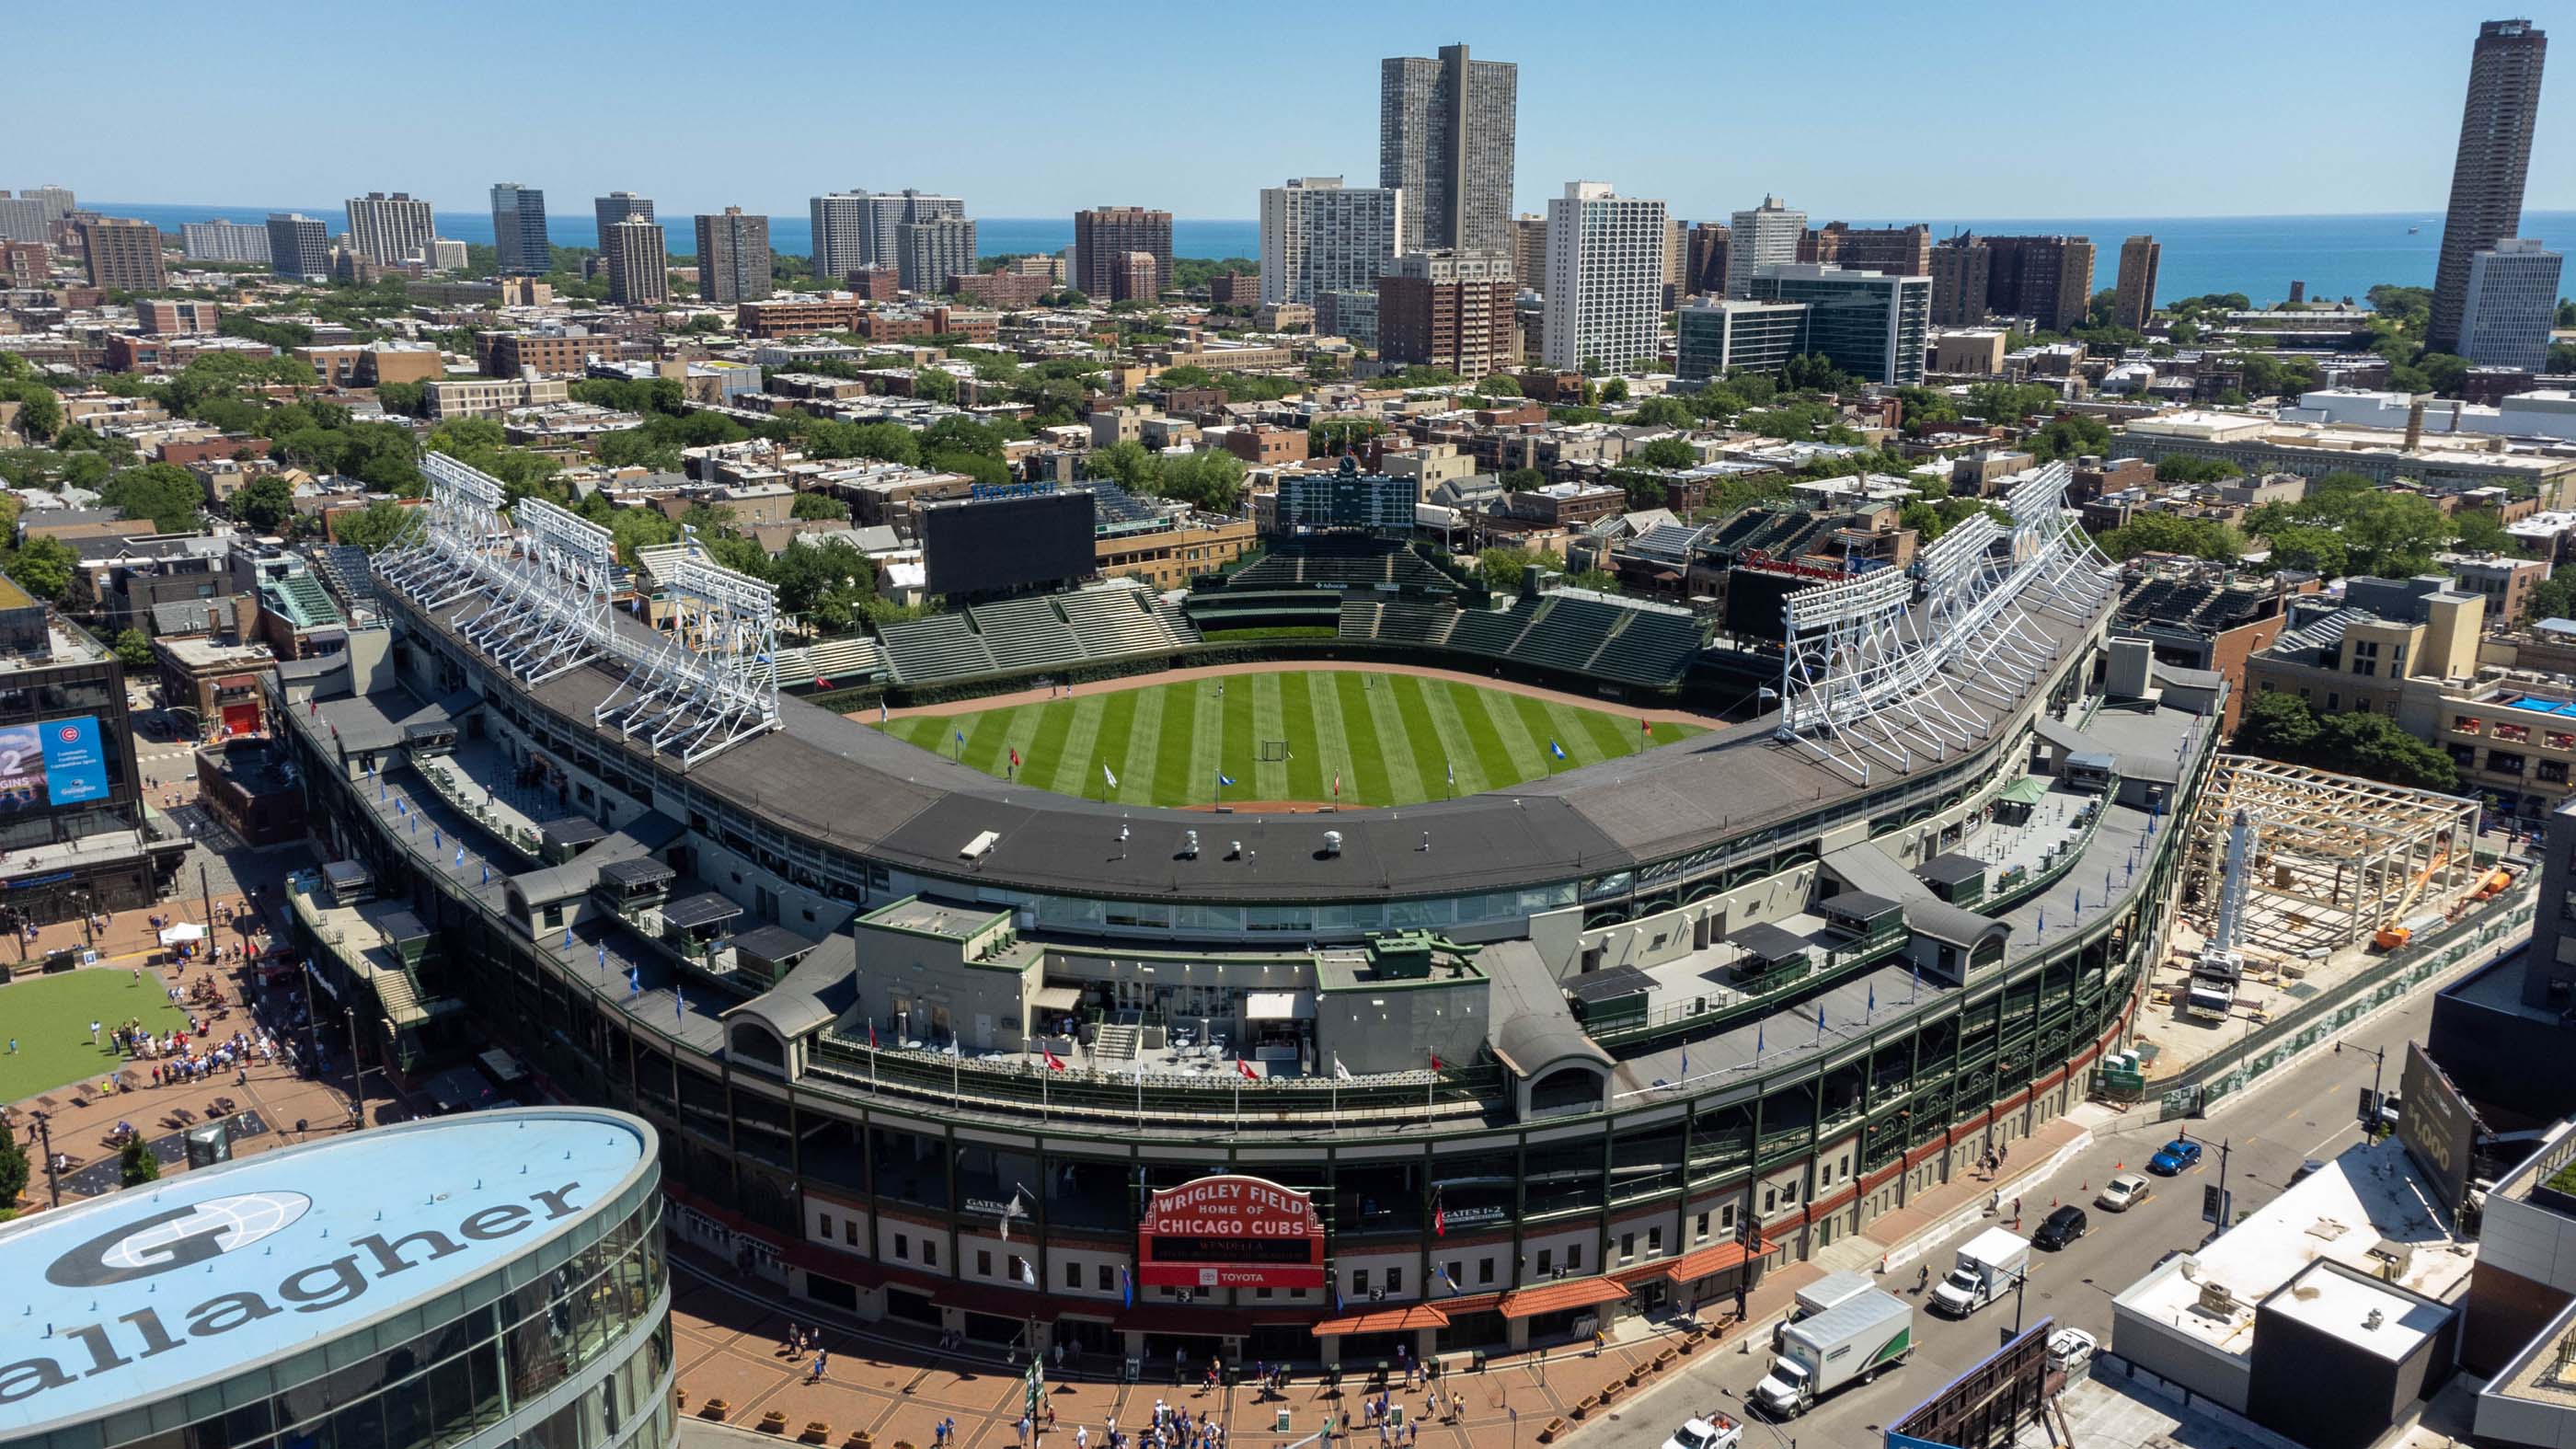 U.S. court sues Wrigley Field for not complying with ADA requirements